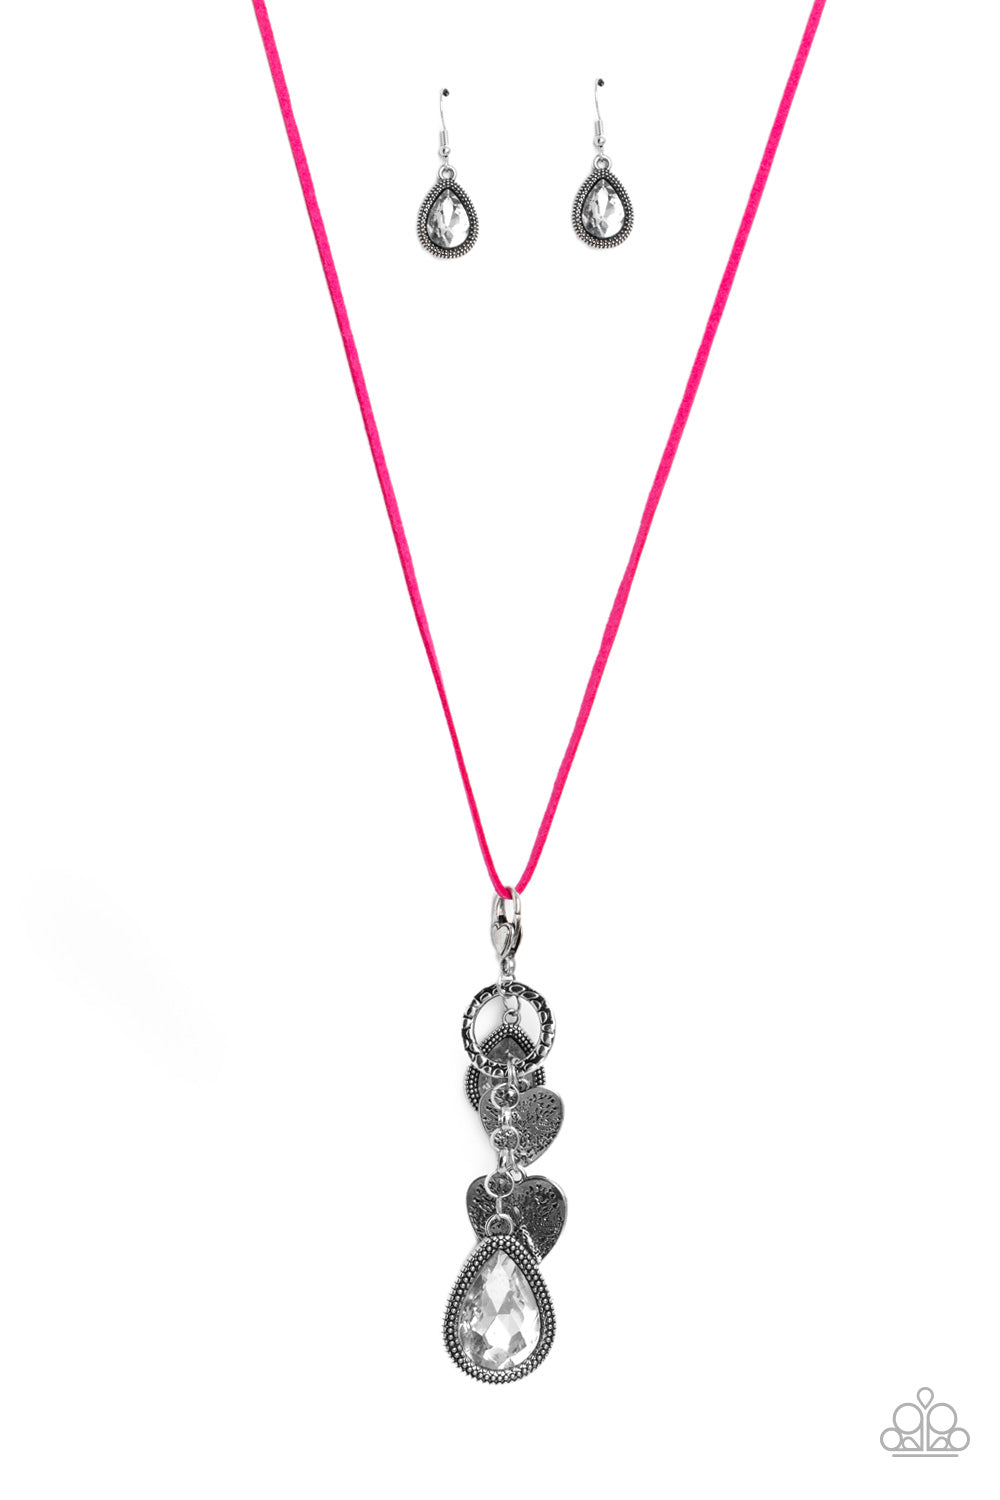 Casanova Clique Paparazzi Accessories Necklace with Earrings - Pink